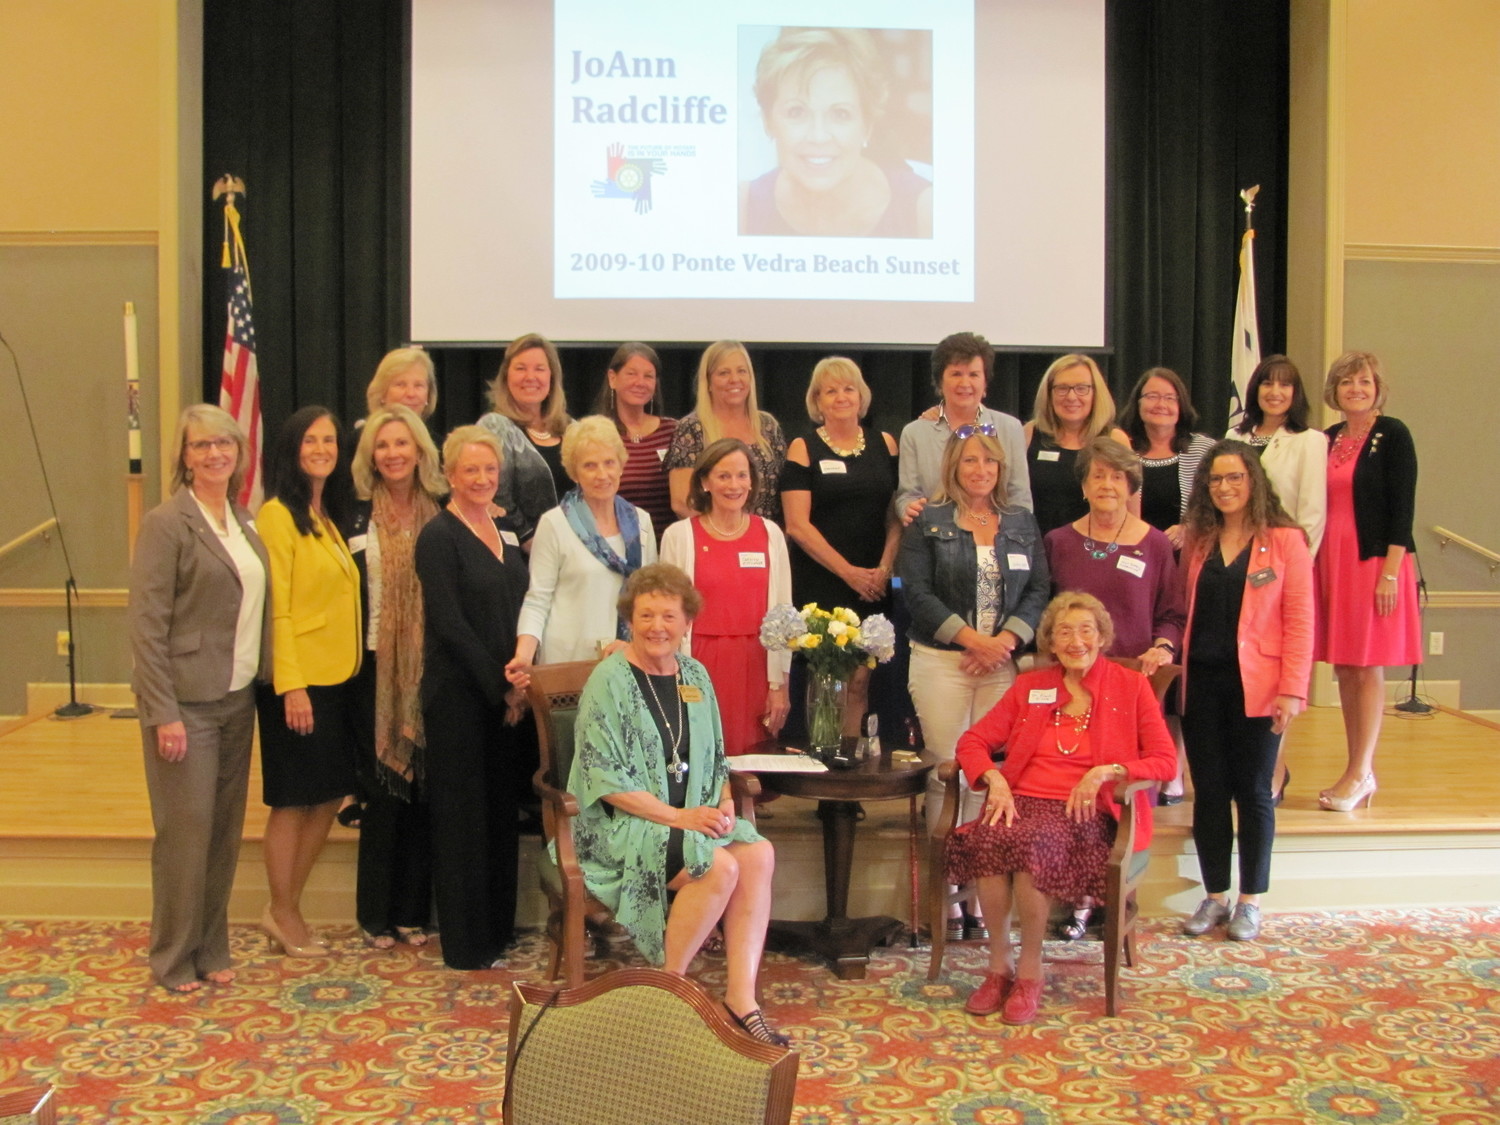 Past and current female presidents and leaders of local Rotary clubs were honored Monday, May 21 at Fleet Landing at an event that celebrated 30 years of women in Rotary.